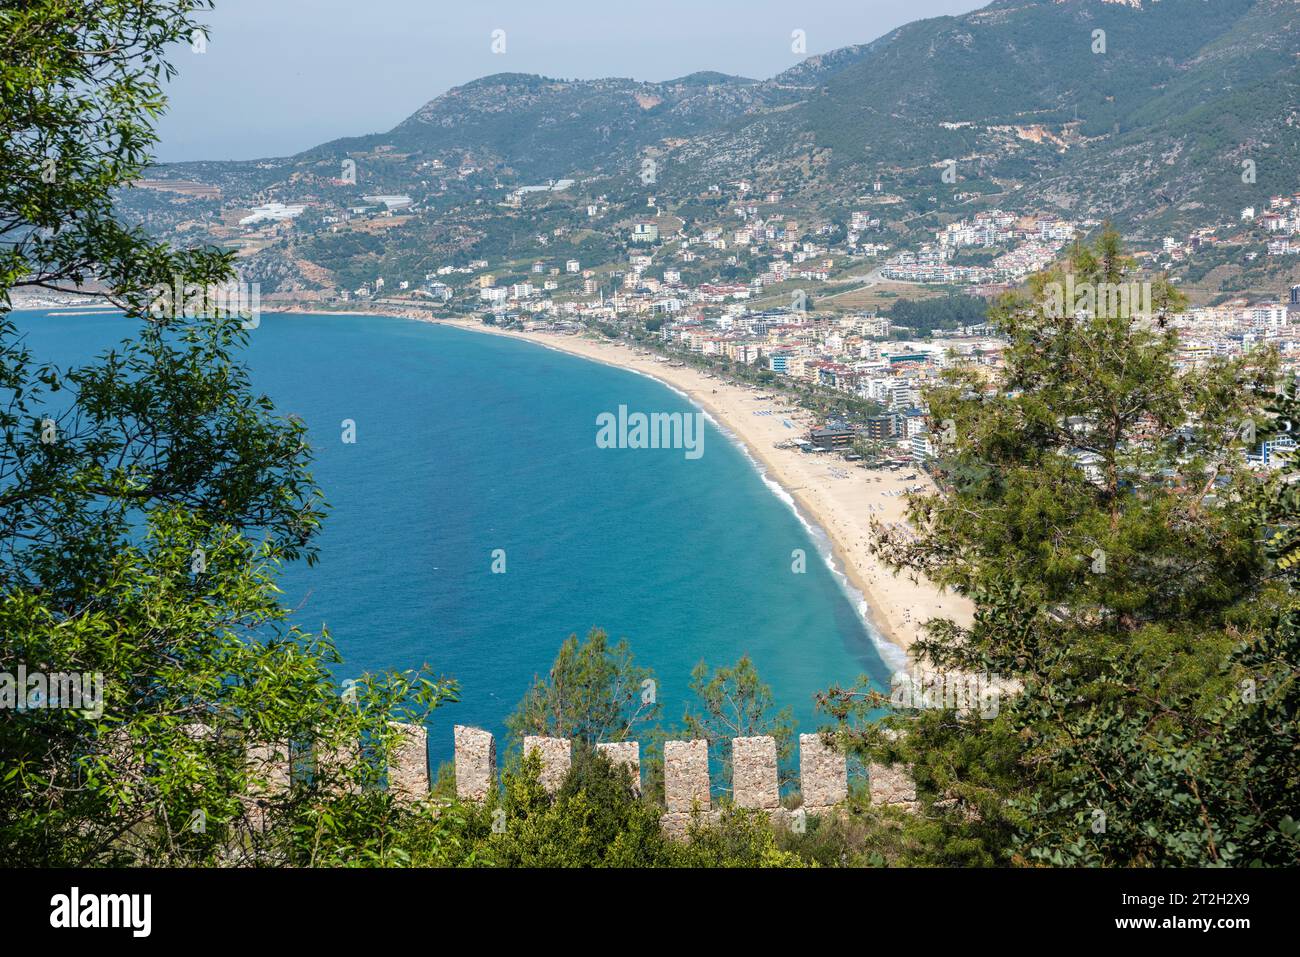 Aerial view over Cleopatra’s Beach in Alanya, Turkey. View across vegetation and castle walls. Stock Photo